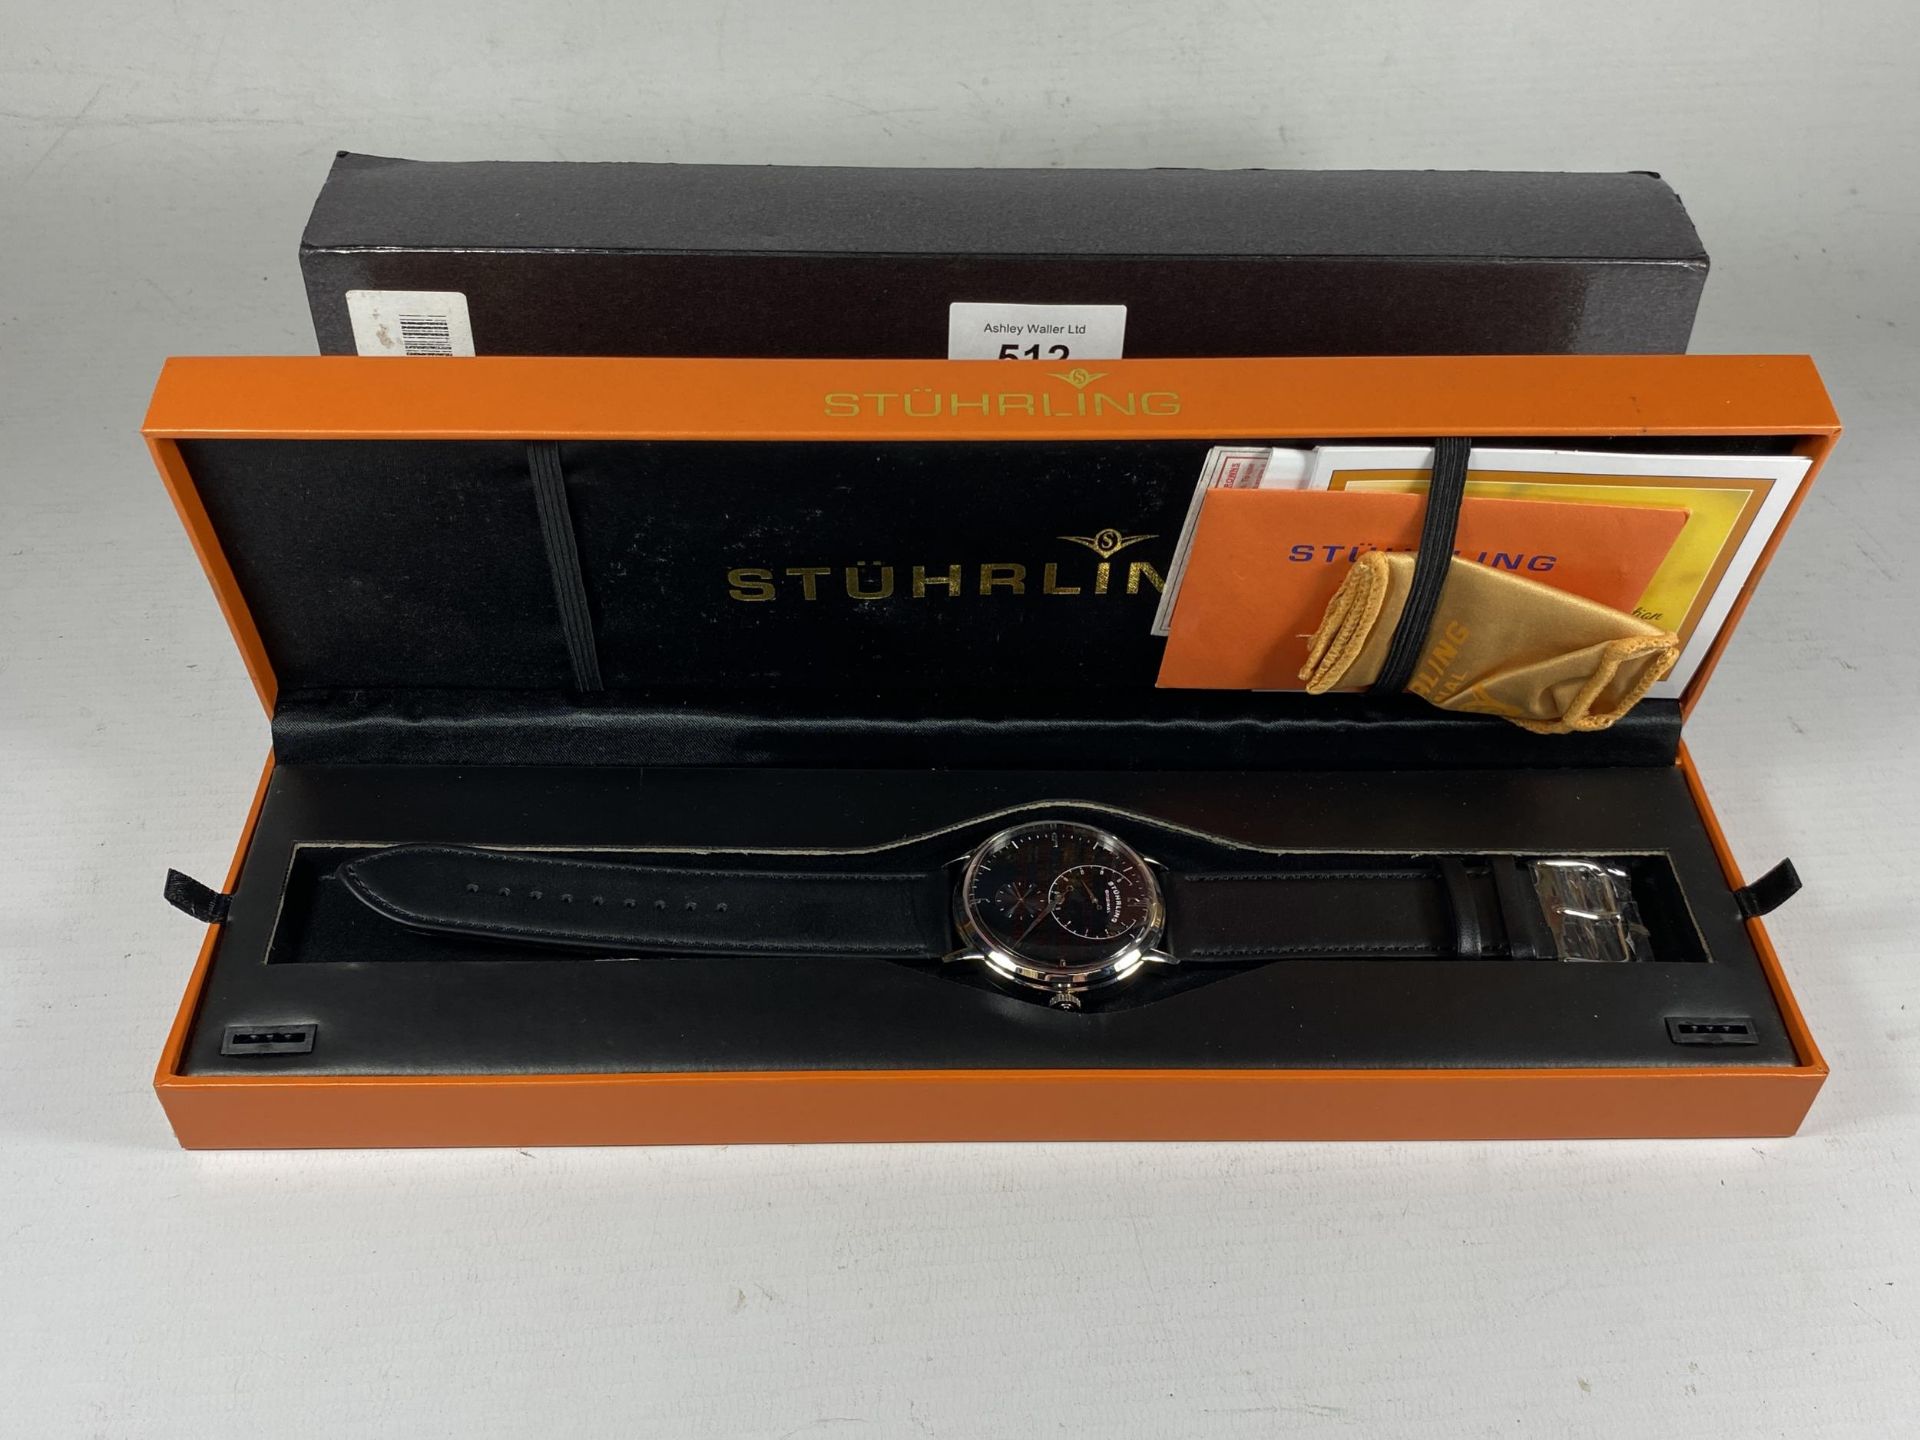 A GENTS BOXED STURHLING WATCHWITH PAPERS, CLOTH ETC